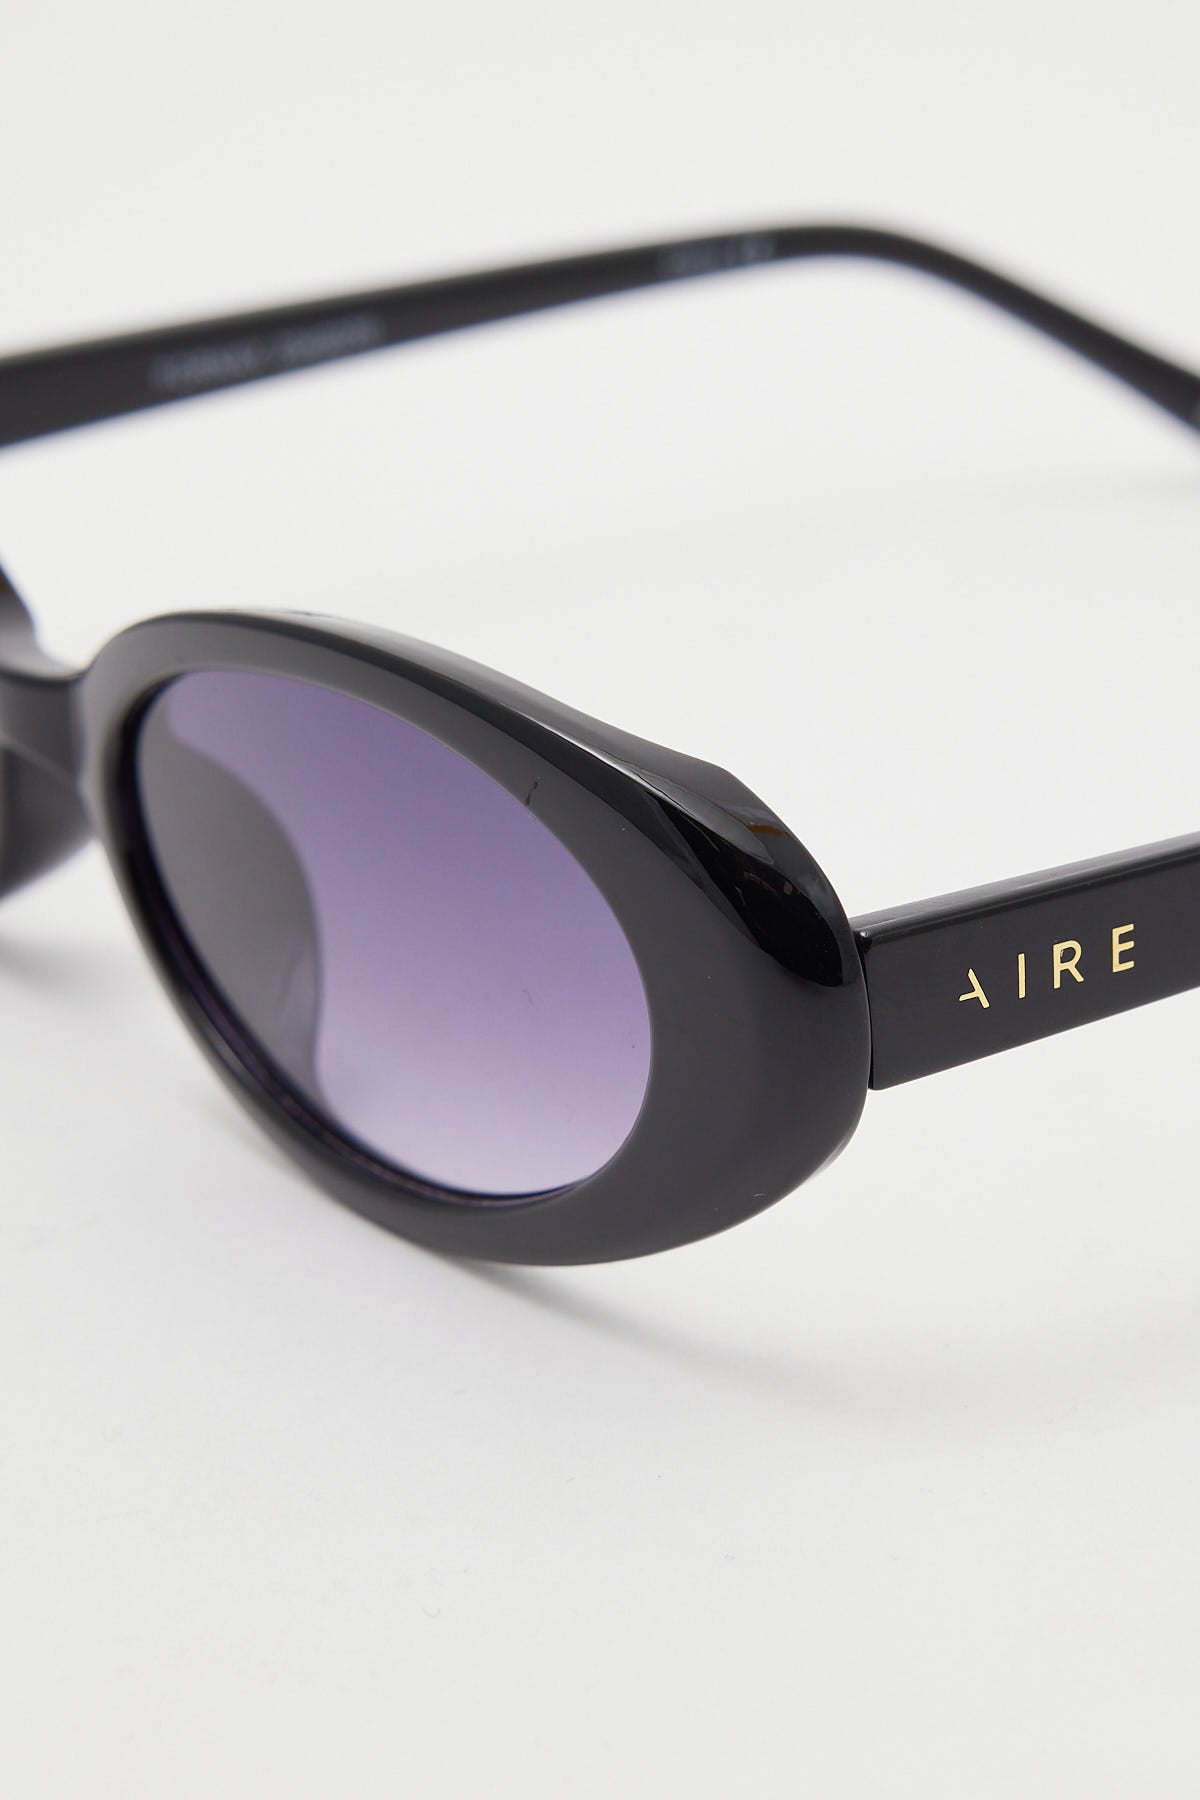 Aire Fornax Black/Cool Smoke Gradient